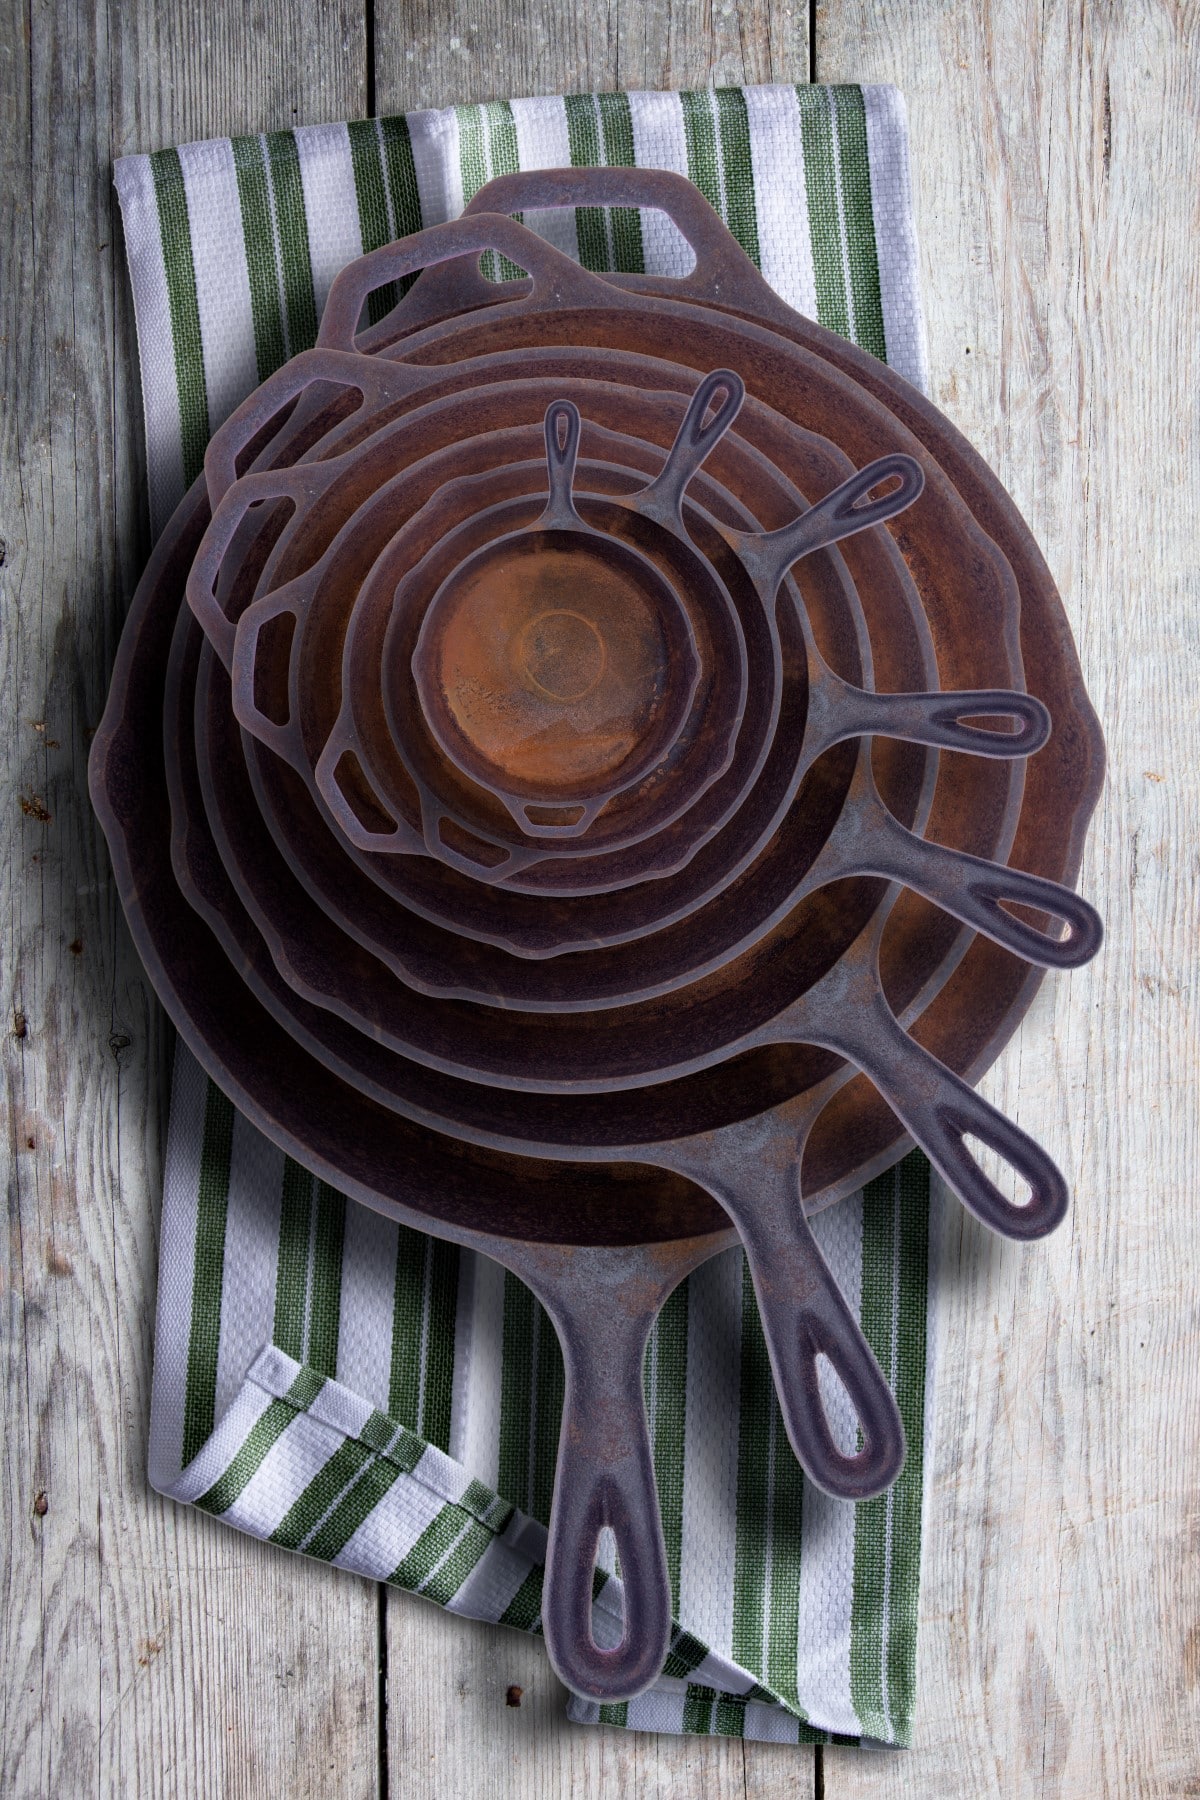 Collection of round rusty cast iron frying pans in diminishing sizes stacked one inside the other, viewed from above on a rustic napkin on an old wooden table.